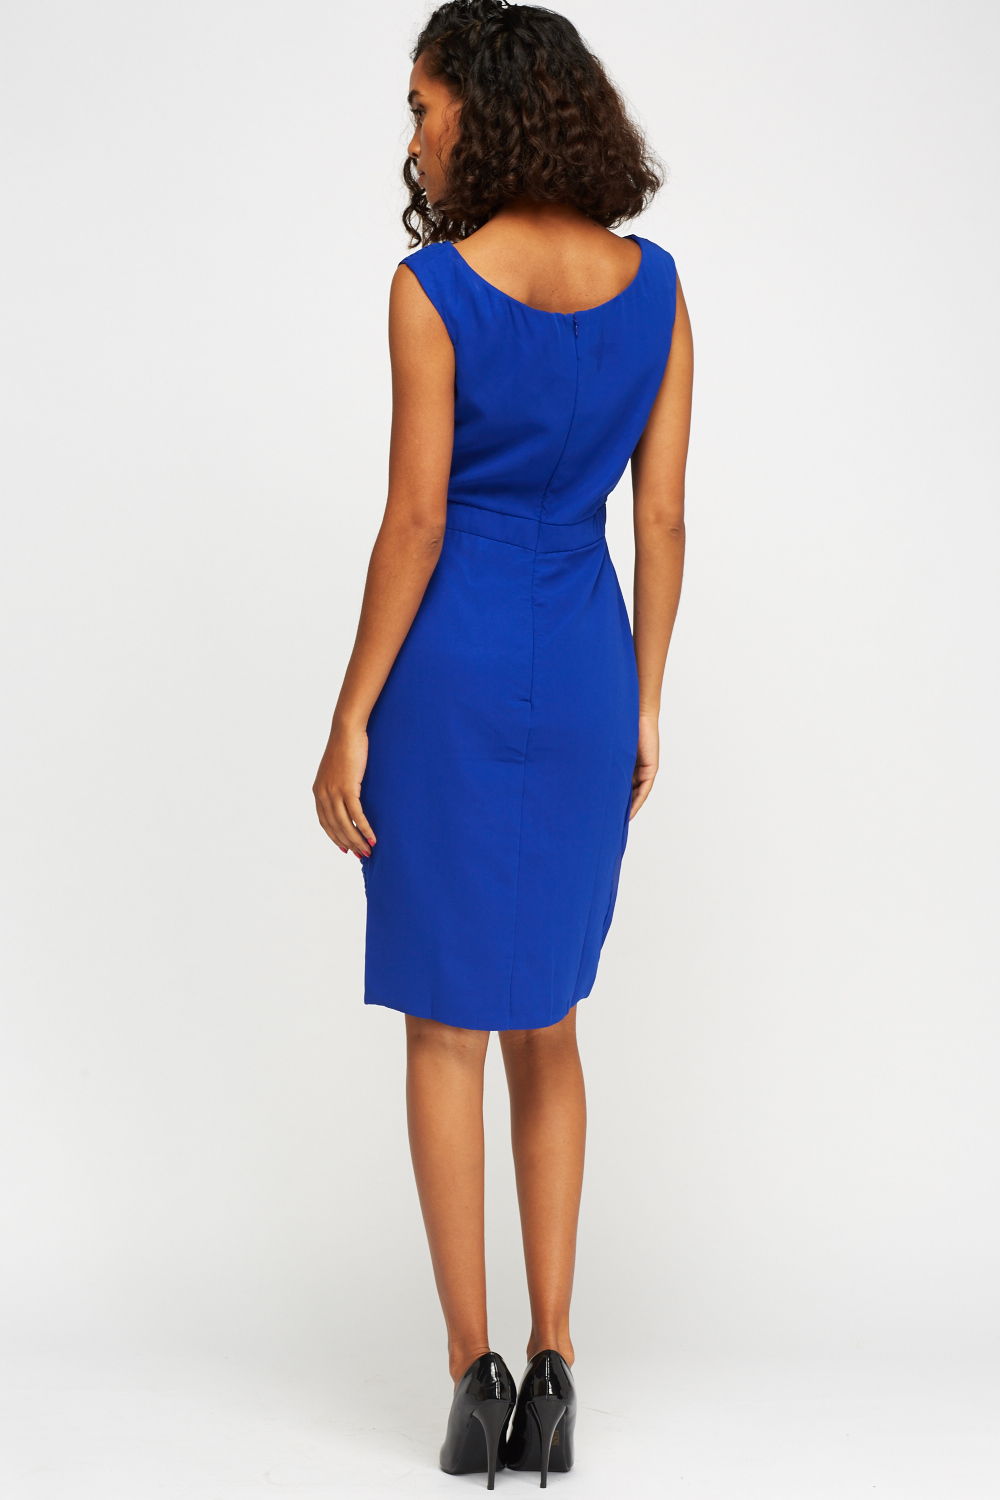 Royal Blue Ruched Wrap Dress - Just $7